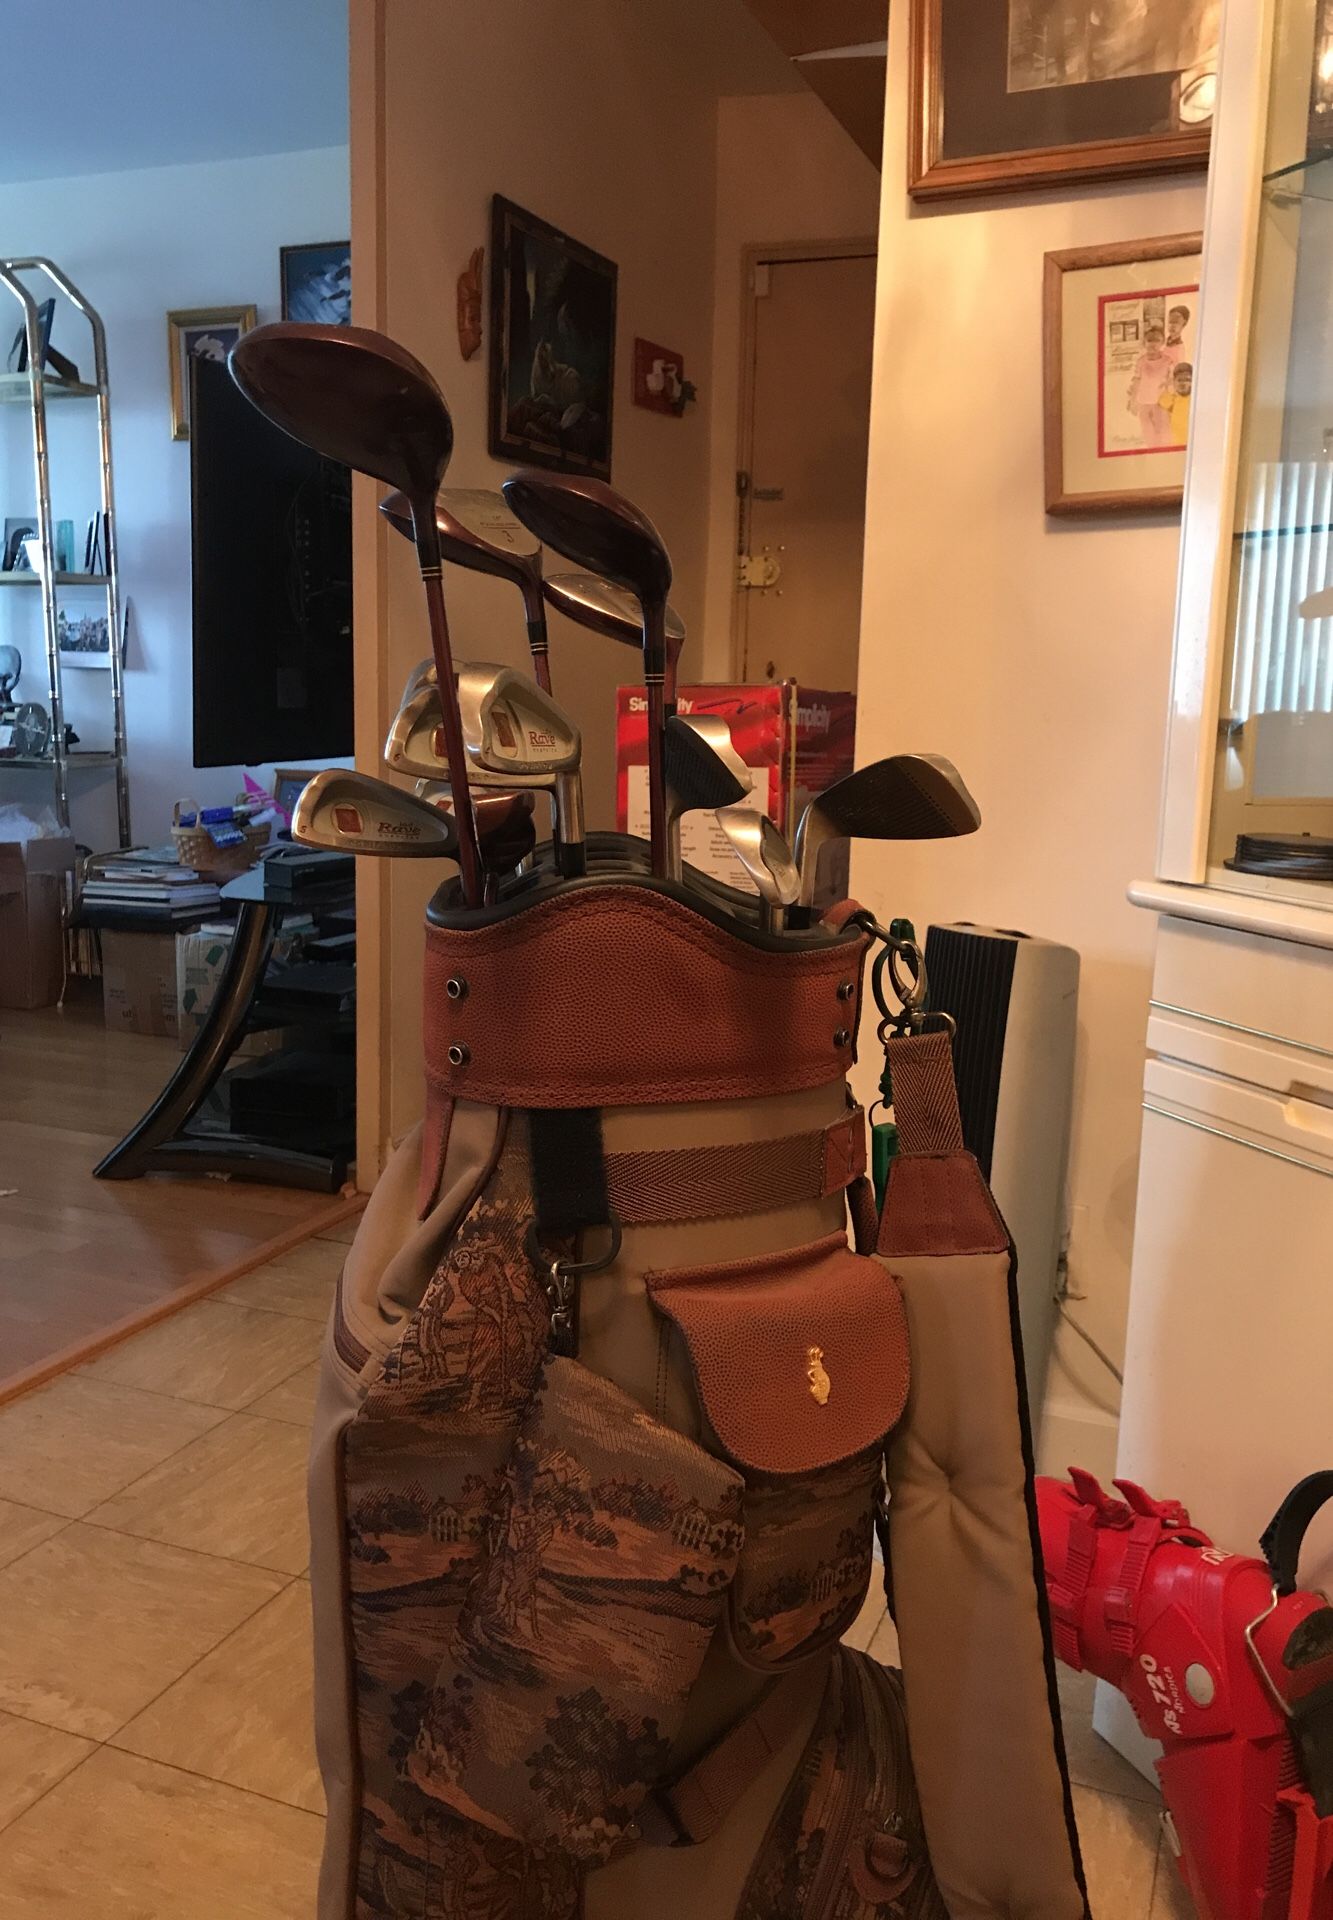 Lady Park Golf clubs with boutique golf bag